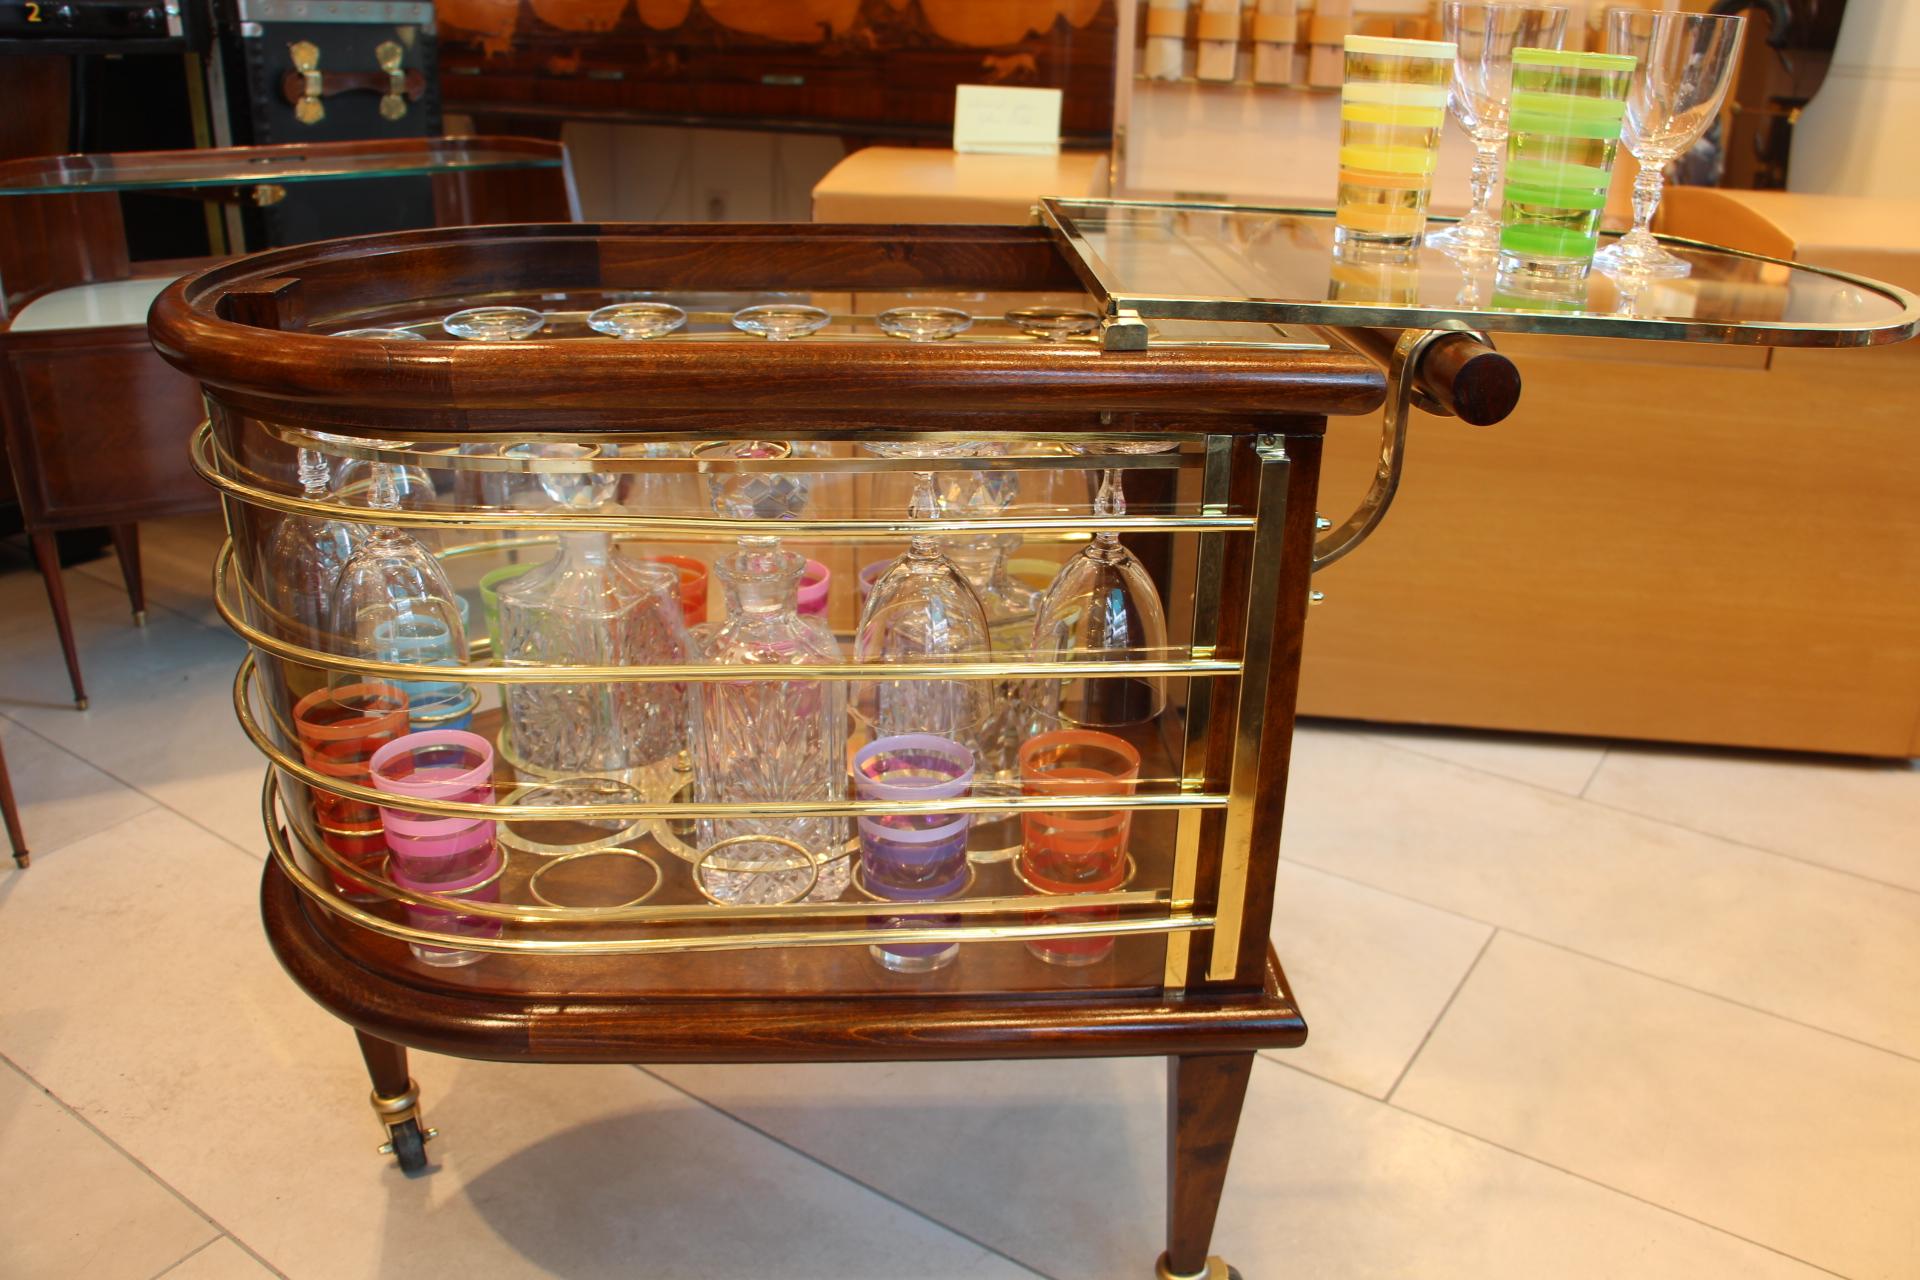 This fabulous bar cart from Louis Sognot features rounded sides with brass slats all around. Its general shape evokes a nautical accent. To open it and reach glasses and bottles, its glass top lifts and can be used to put glasses on. Inside is fully